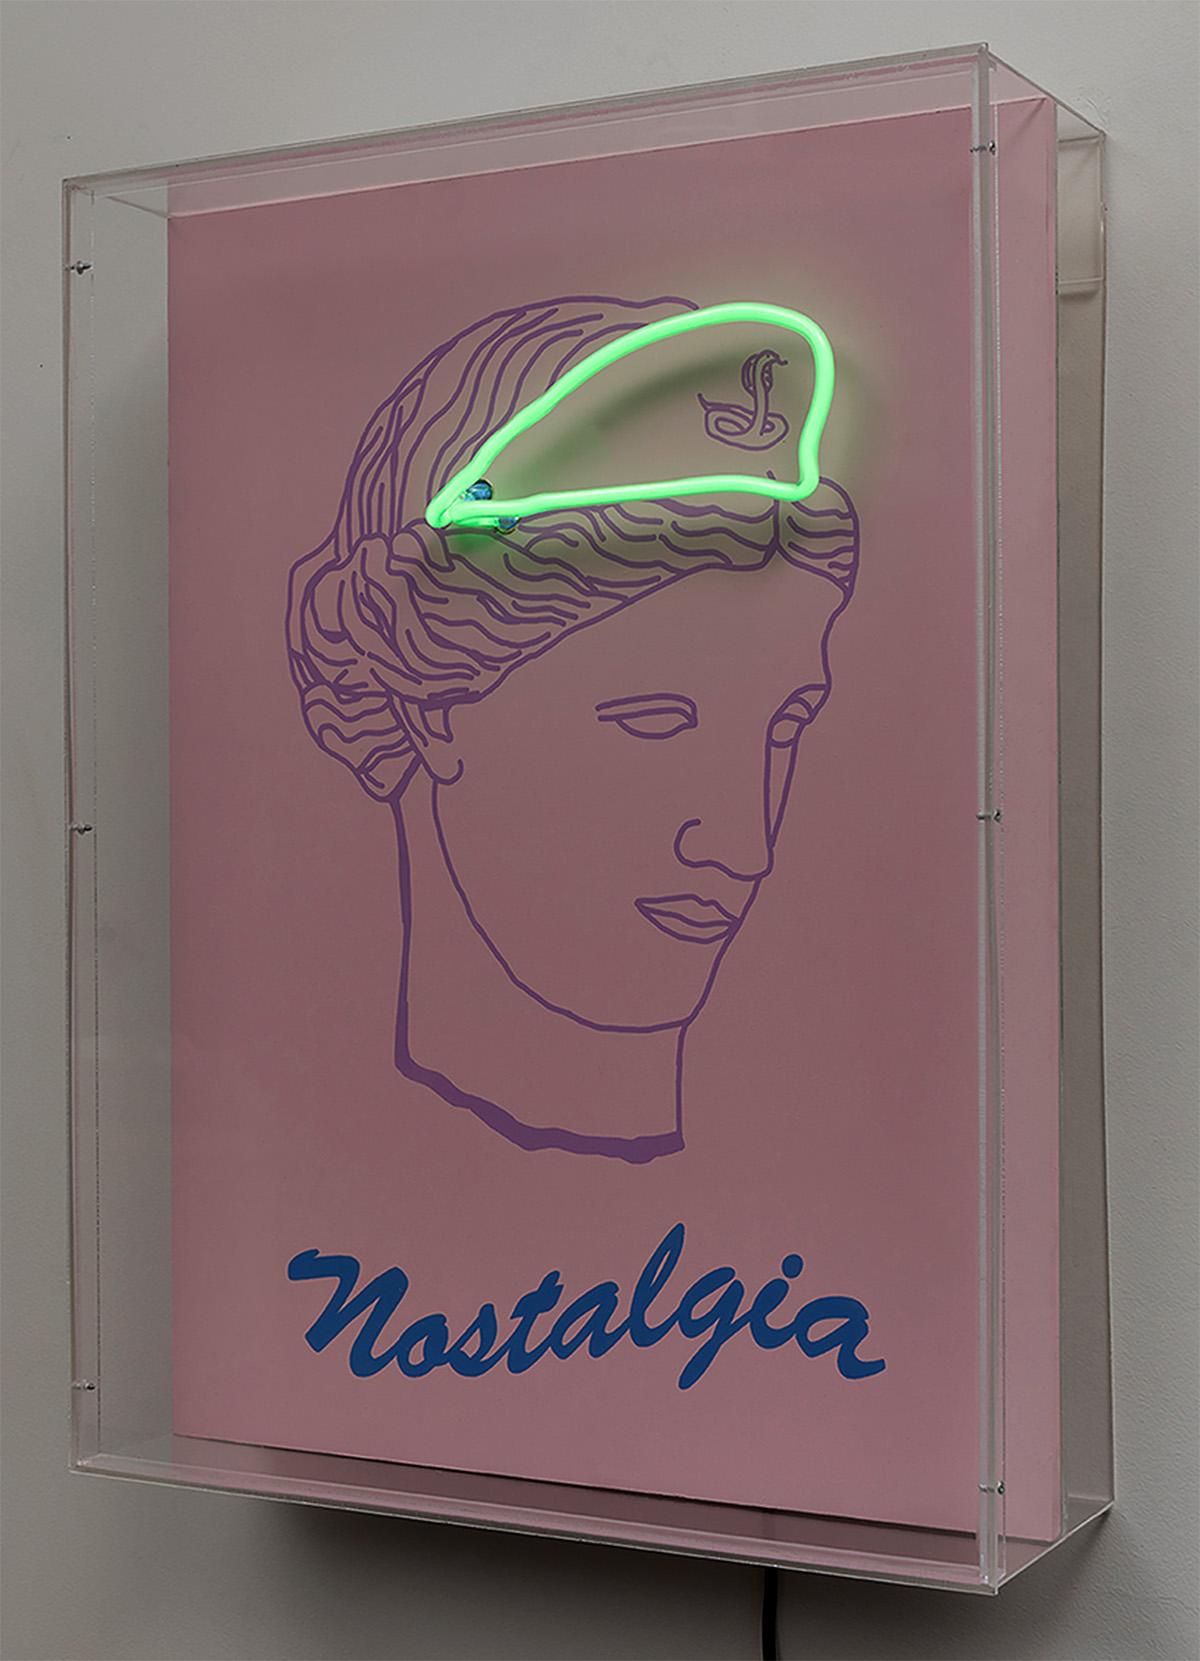 Modern Nostalgia. Neon Light Box Wall Sculpture. From the series Neon Classics For Sale